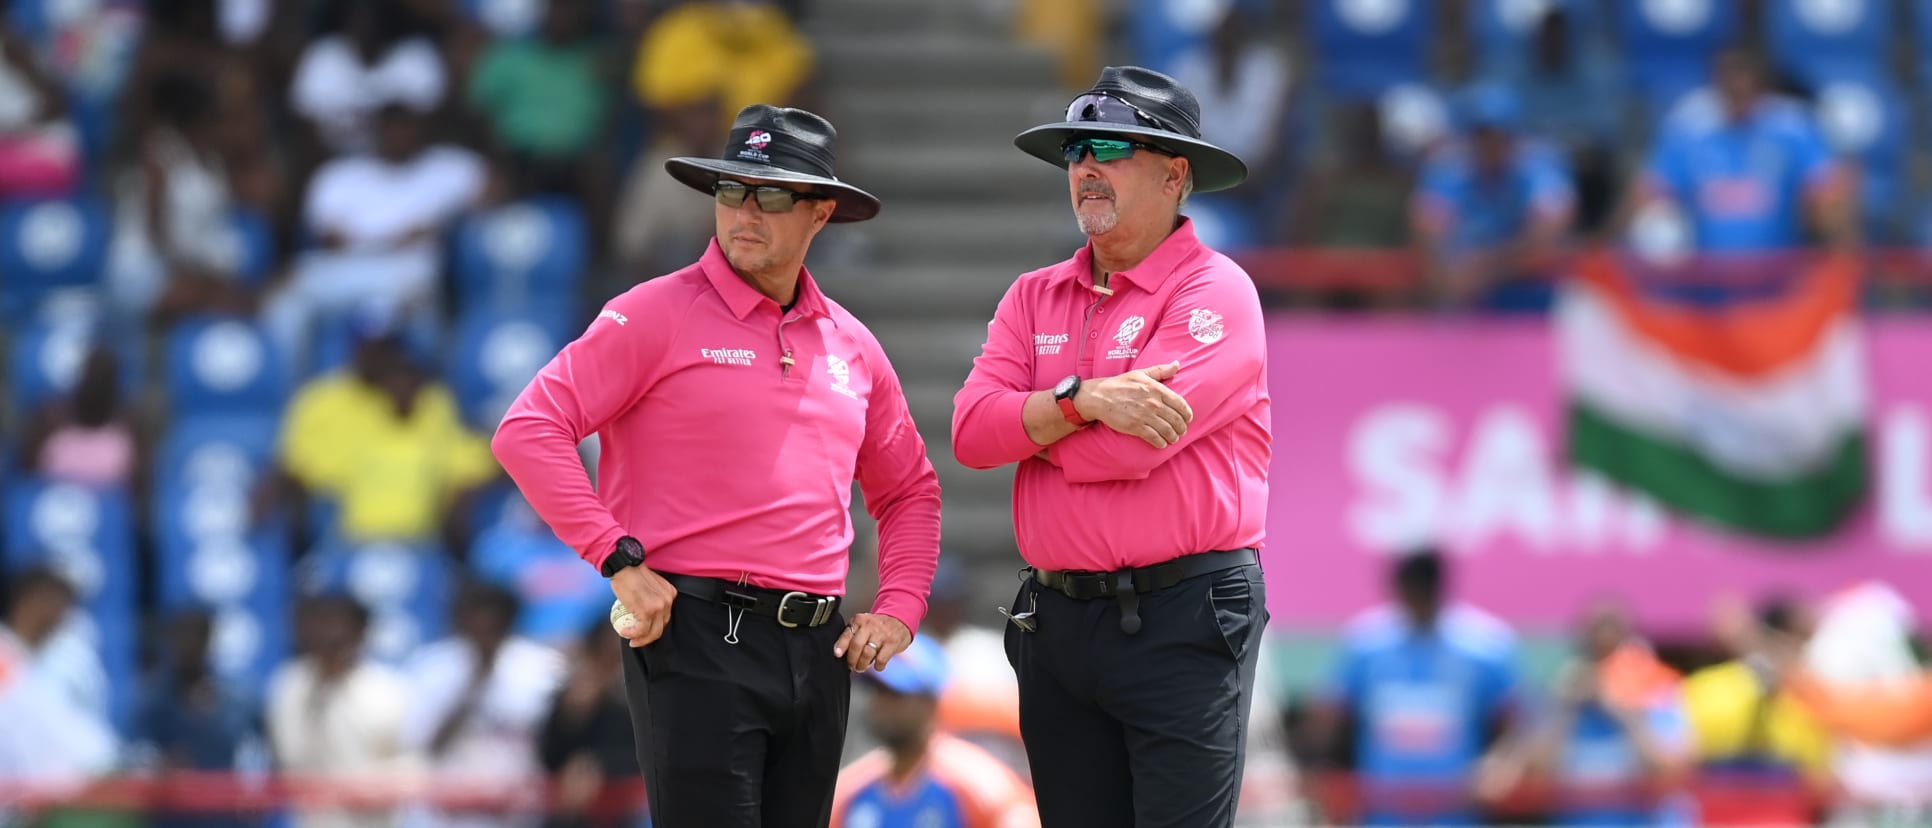 Umpires Richard Illingworth and Richard Kettleborough during the ICC Men's T20 Cricket World Cup West Indies & USA 2024 Super Eight match between Australia and India at Daren Sammy National Cricket Stadium on June 24, 2024 in Gros Islet, Saint Lucia.